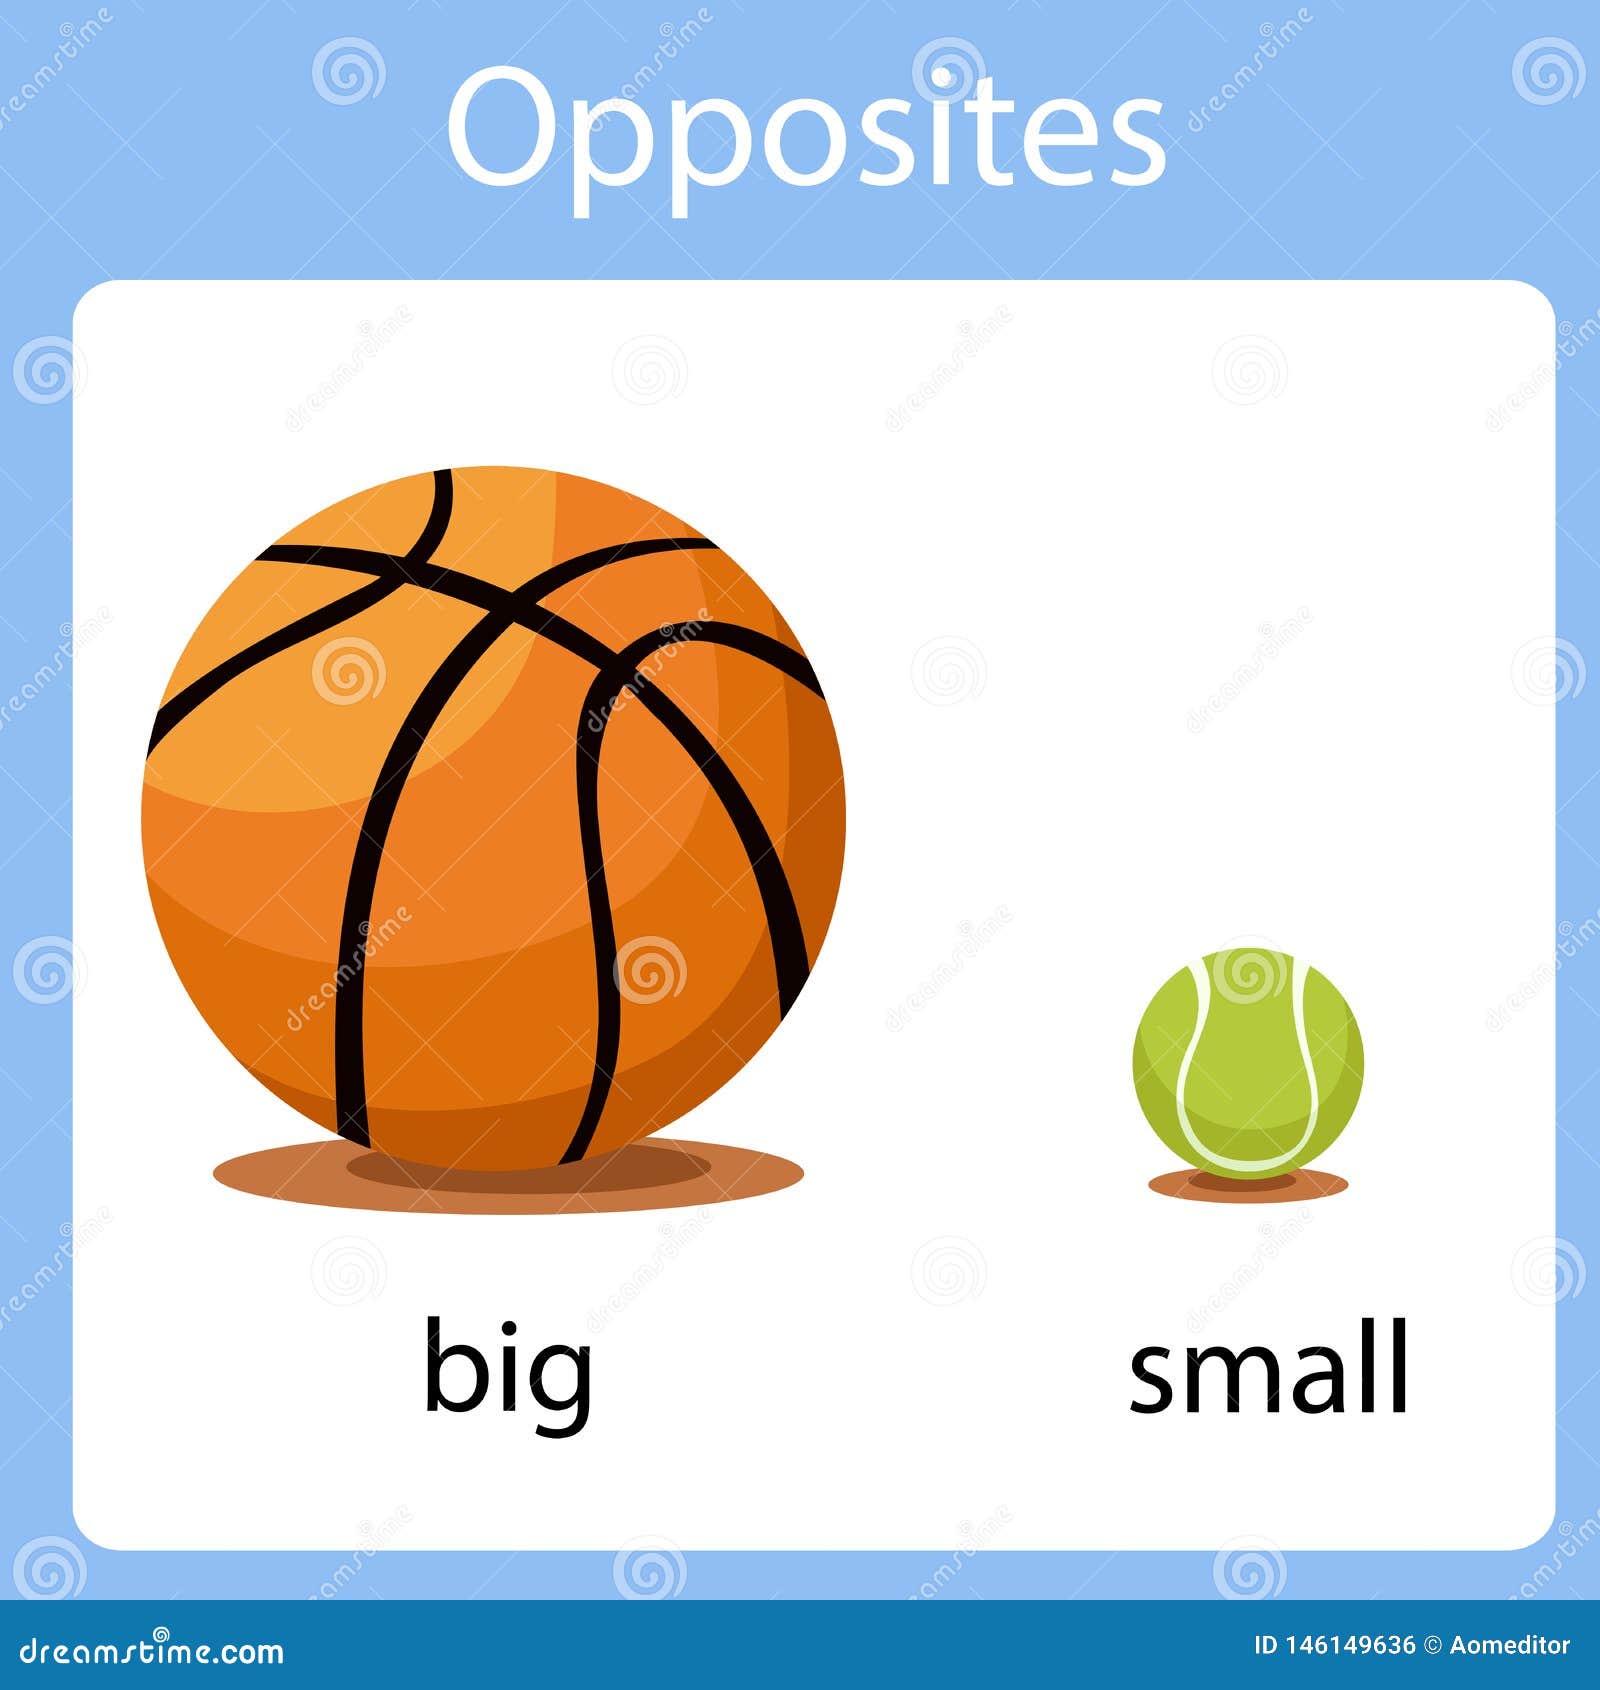 illustrator of opposites big and small